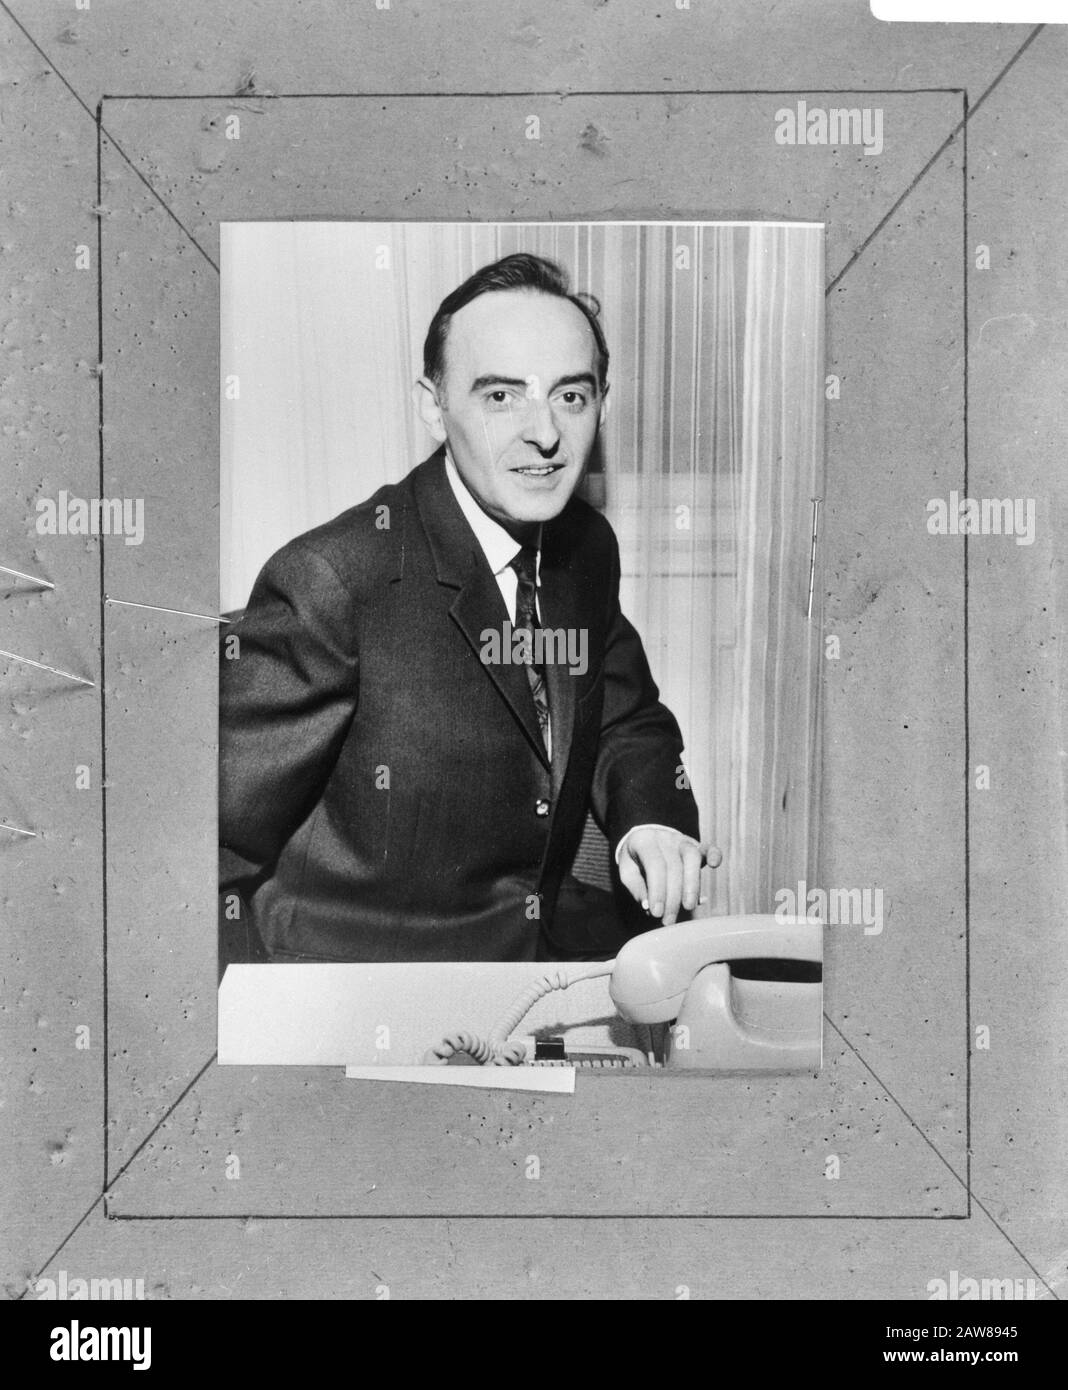 After a miscarriage of justice of the Austrian court took the triple murder suspect Erich Rebitzer, 17 years innocent in prison 'Stein' in Vienna by Annotation: Repro Negative Date : October 19, 1966 Location: Austria, Vienna Keywords: portraits, prisons Person Name: Rebitzer, Erich Stock Photo